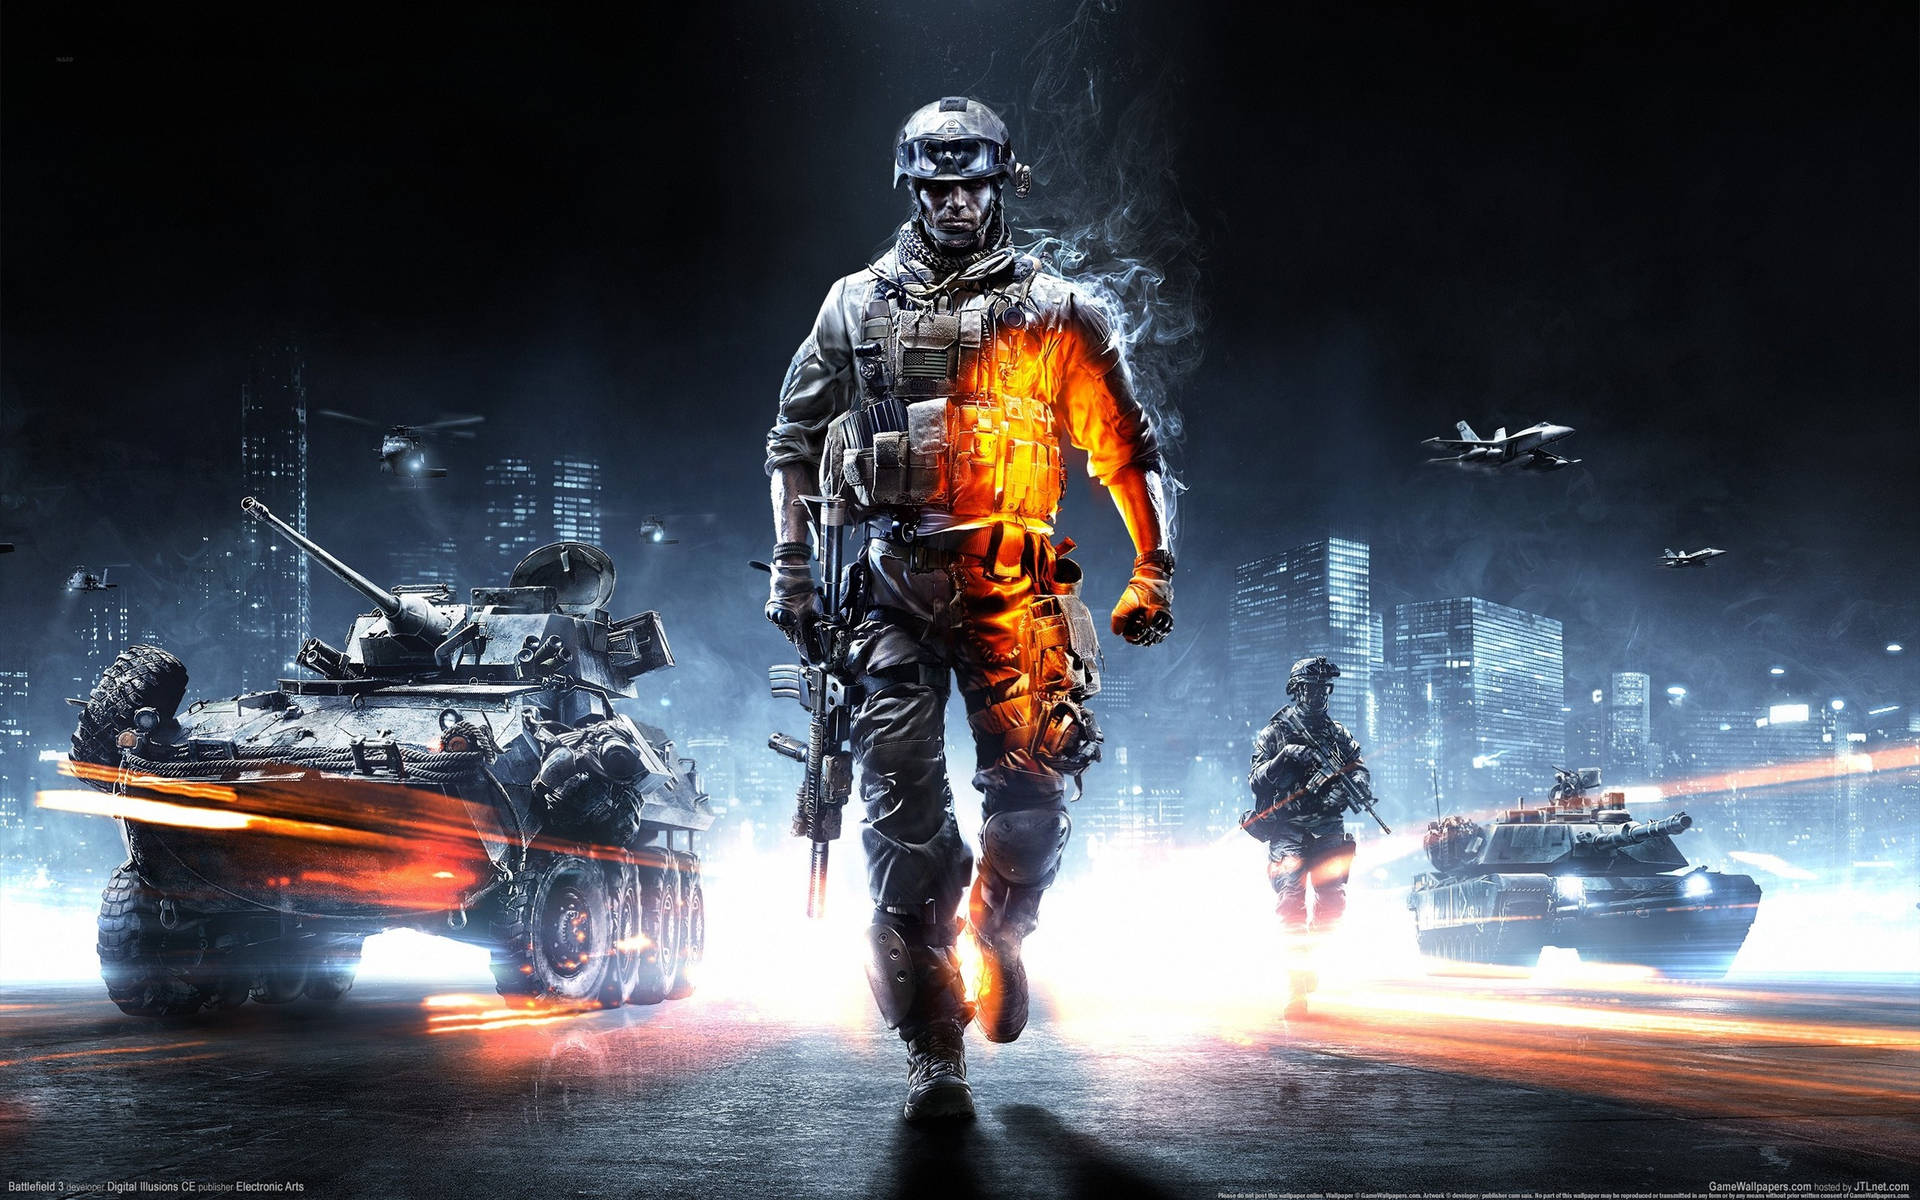 Battlefield3 2011 Fps Game Screenshot Would Be Translated To 